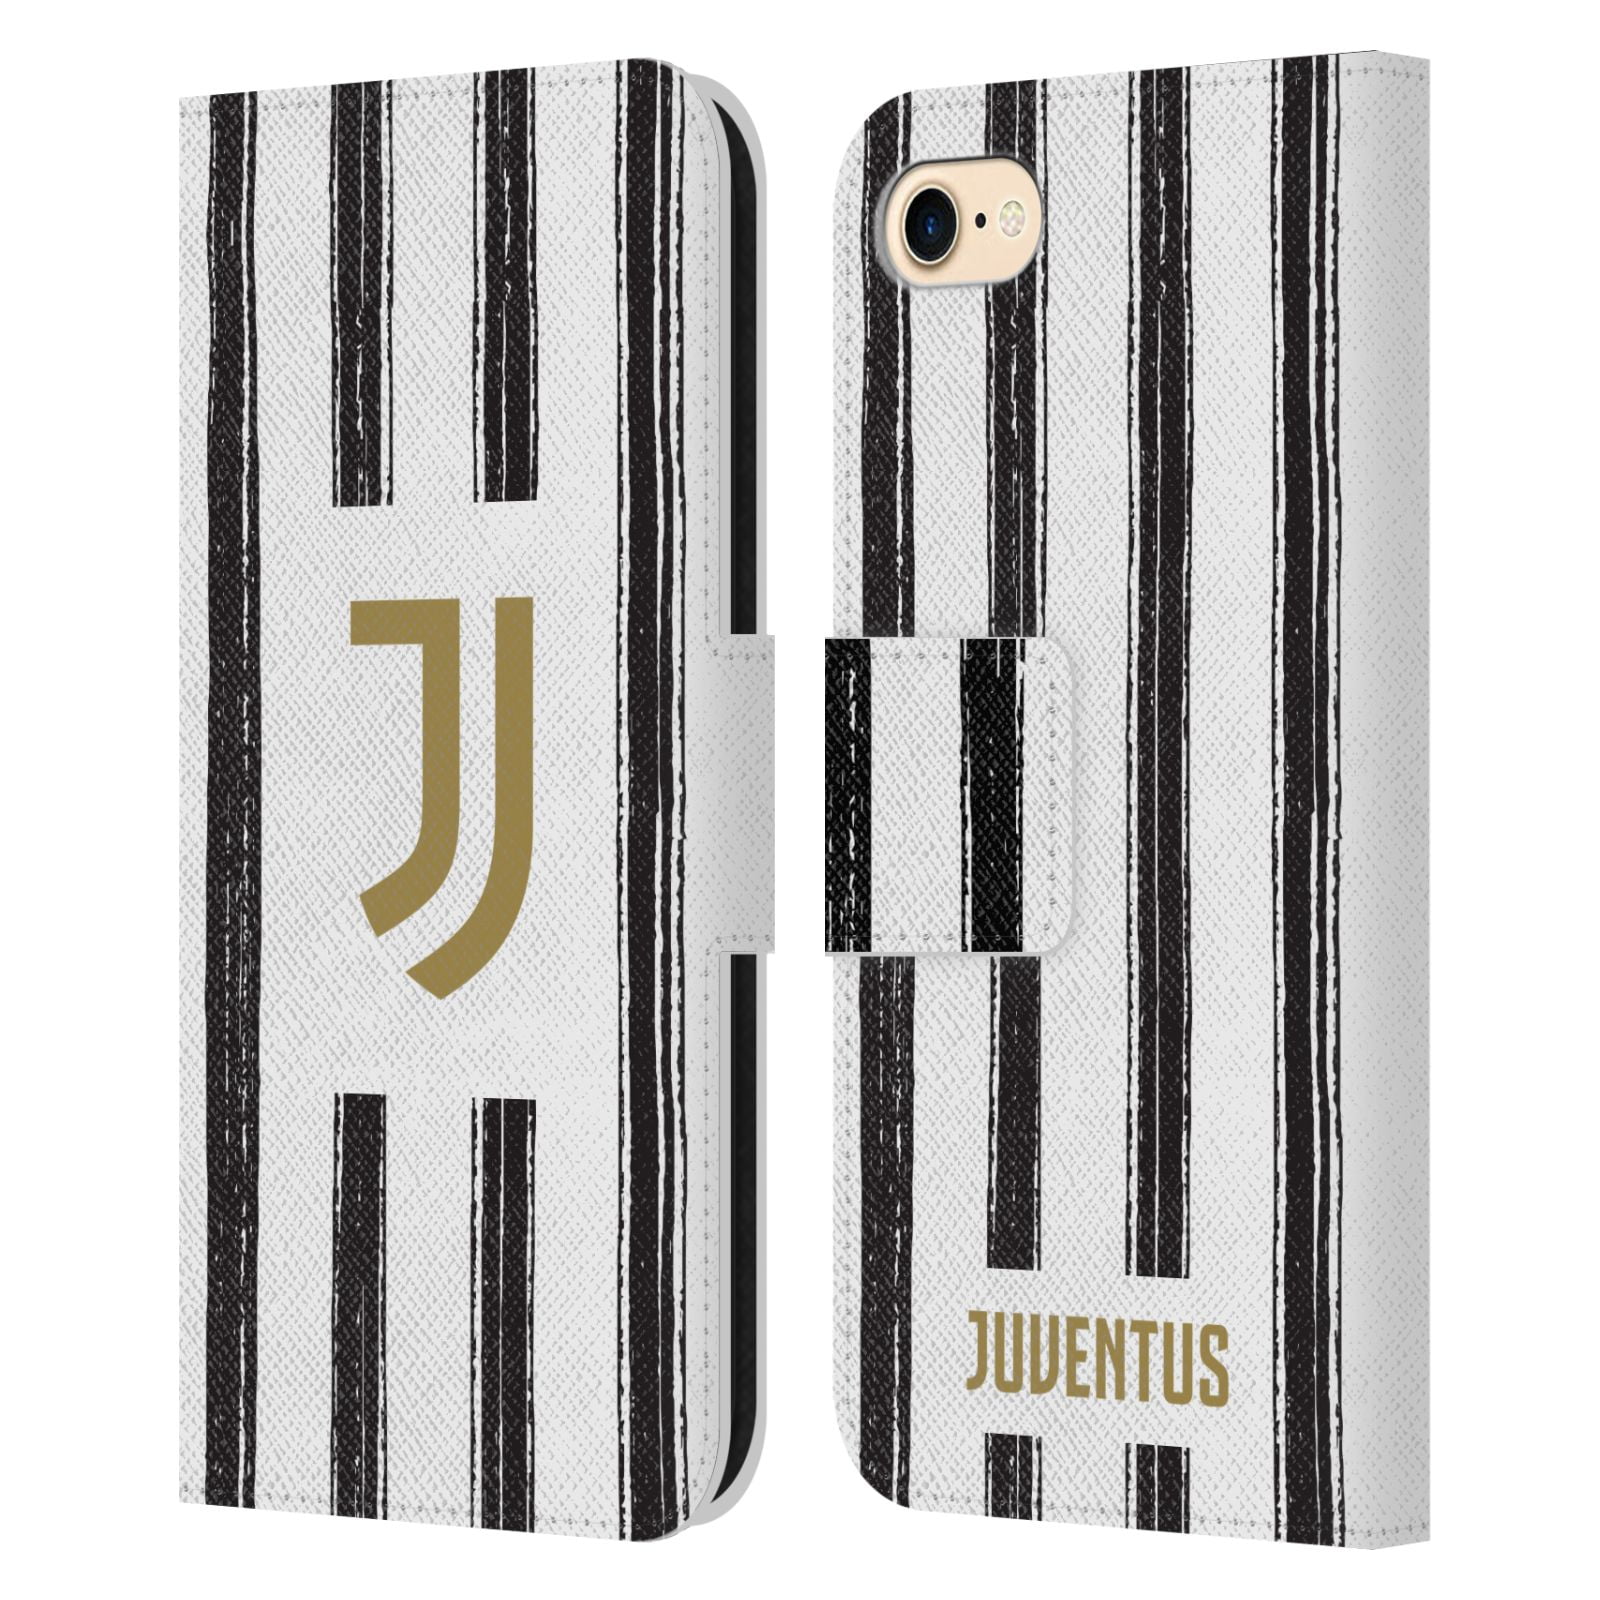 Op maat In zicht Maan Head Case Designs Officially Licensed Juventus Football Club 2020/21 Match  Kit Home Leather Book Wallet Case Cover Compatible with Apple iPhone 7 / 8  / SE 2020 & 2022 - Walmart.com